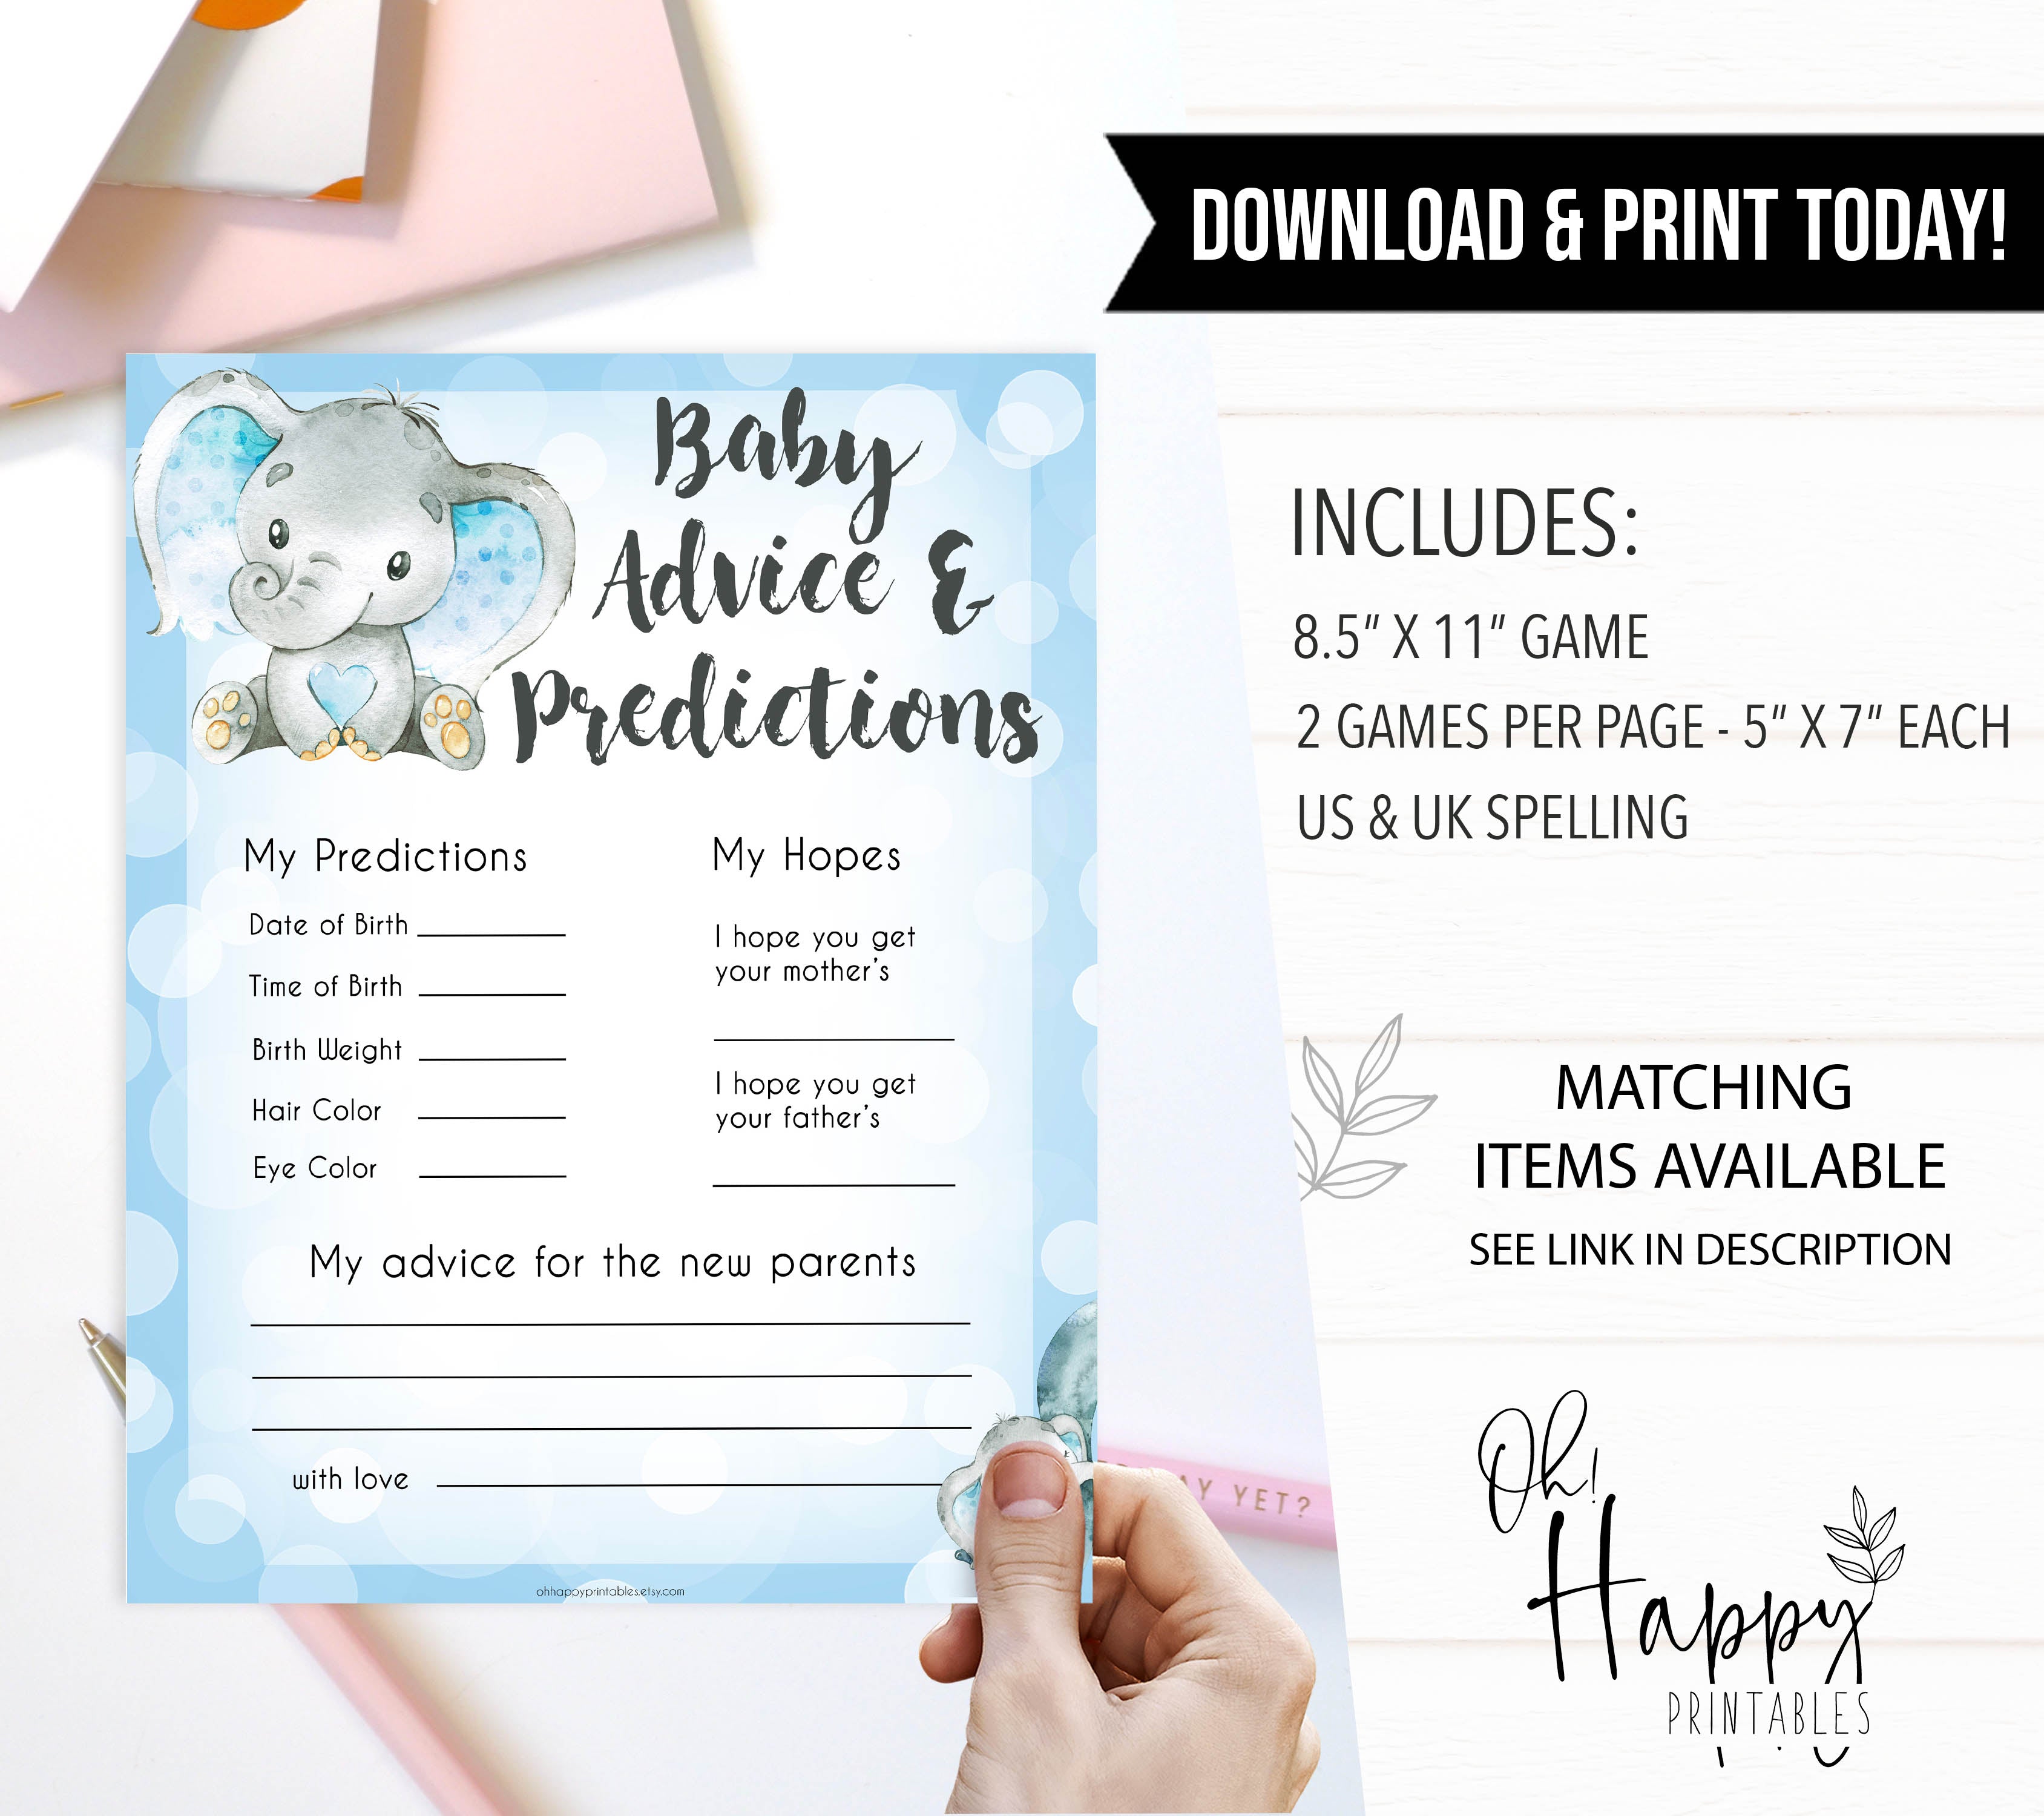 Blue elephant baby games, baby advice and predictions, elephant baby games, printable baby games, top baby games, best baby shower games, baby shower ideas, fun baby games, elephant baby shower